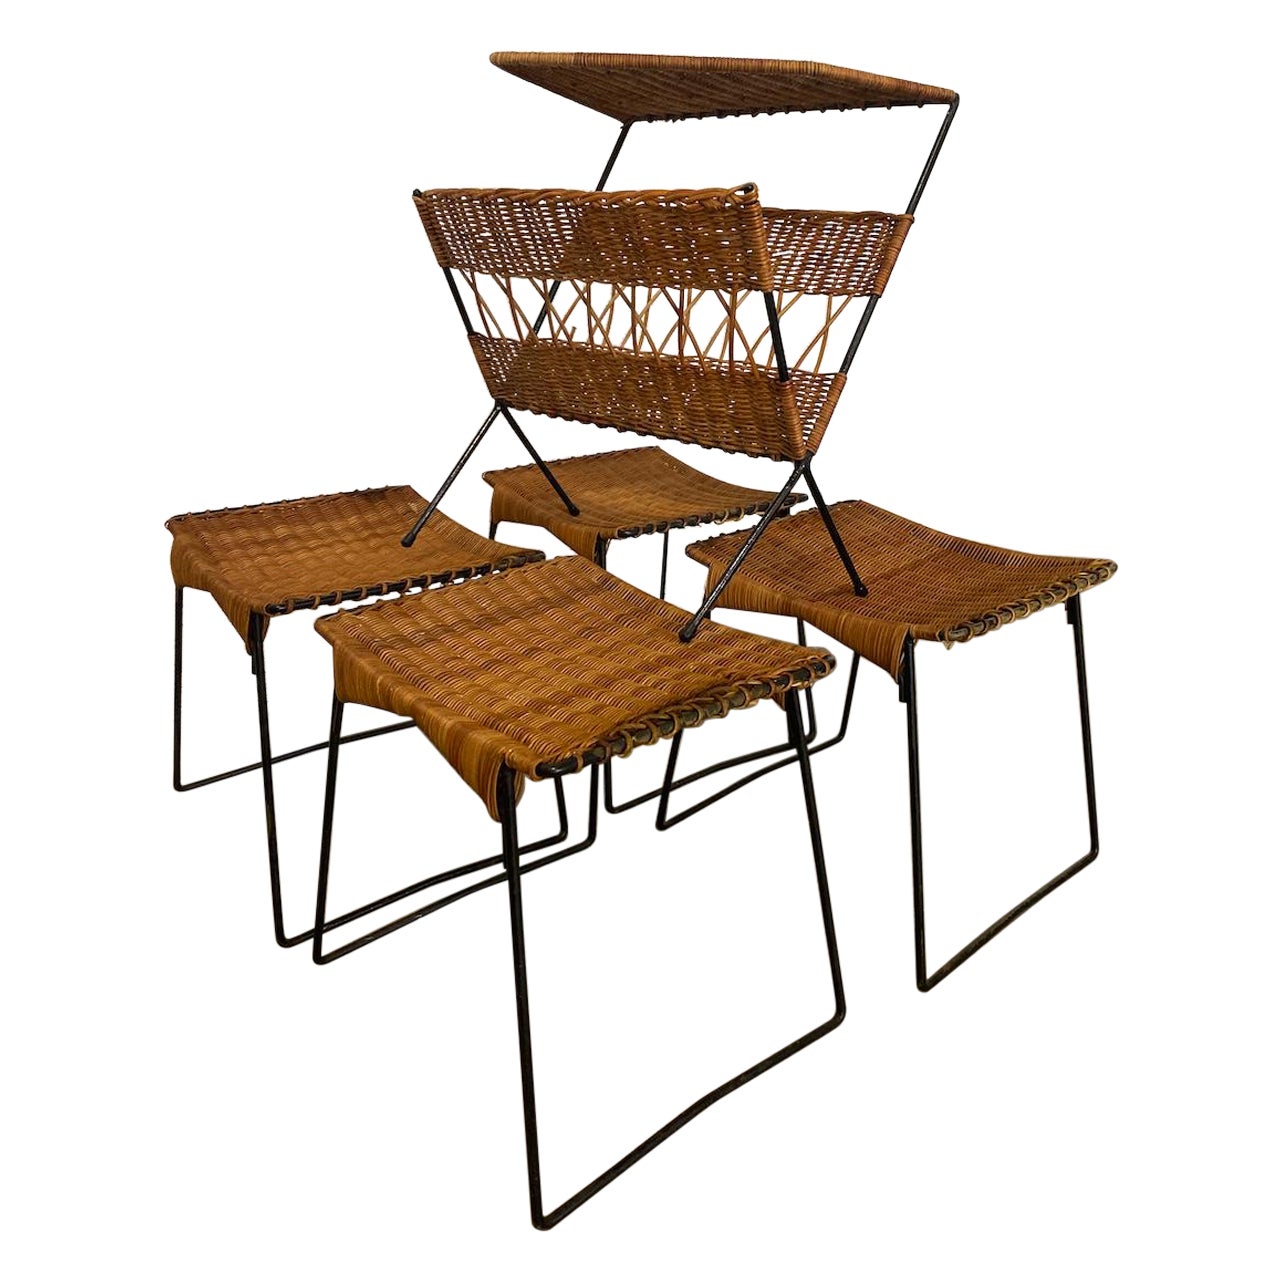 Set of 4 Raoul Guys Stools and Rack Magazine, Airborne 1950 Edition